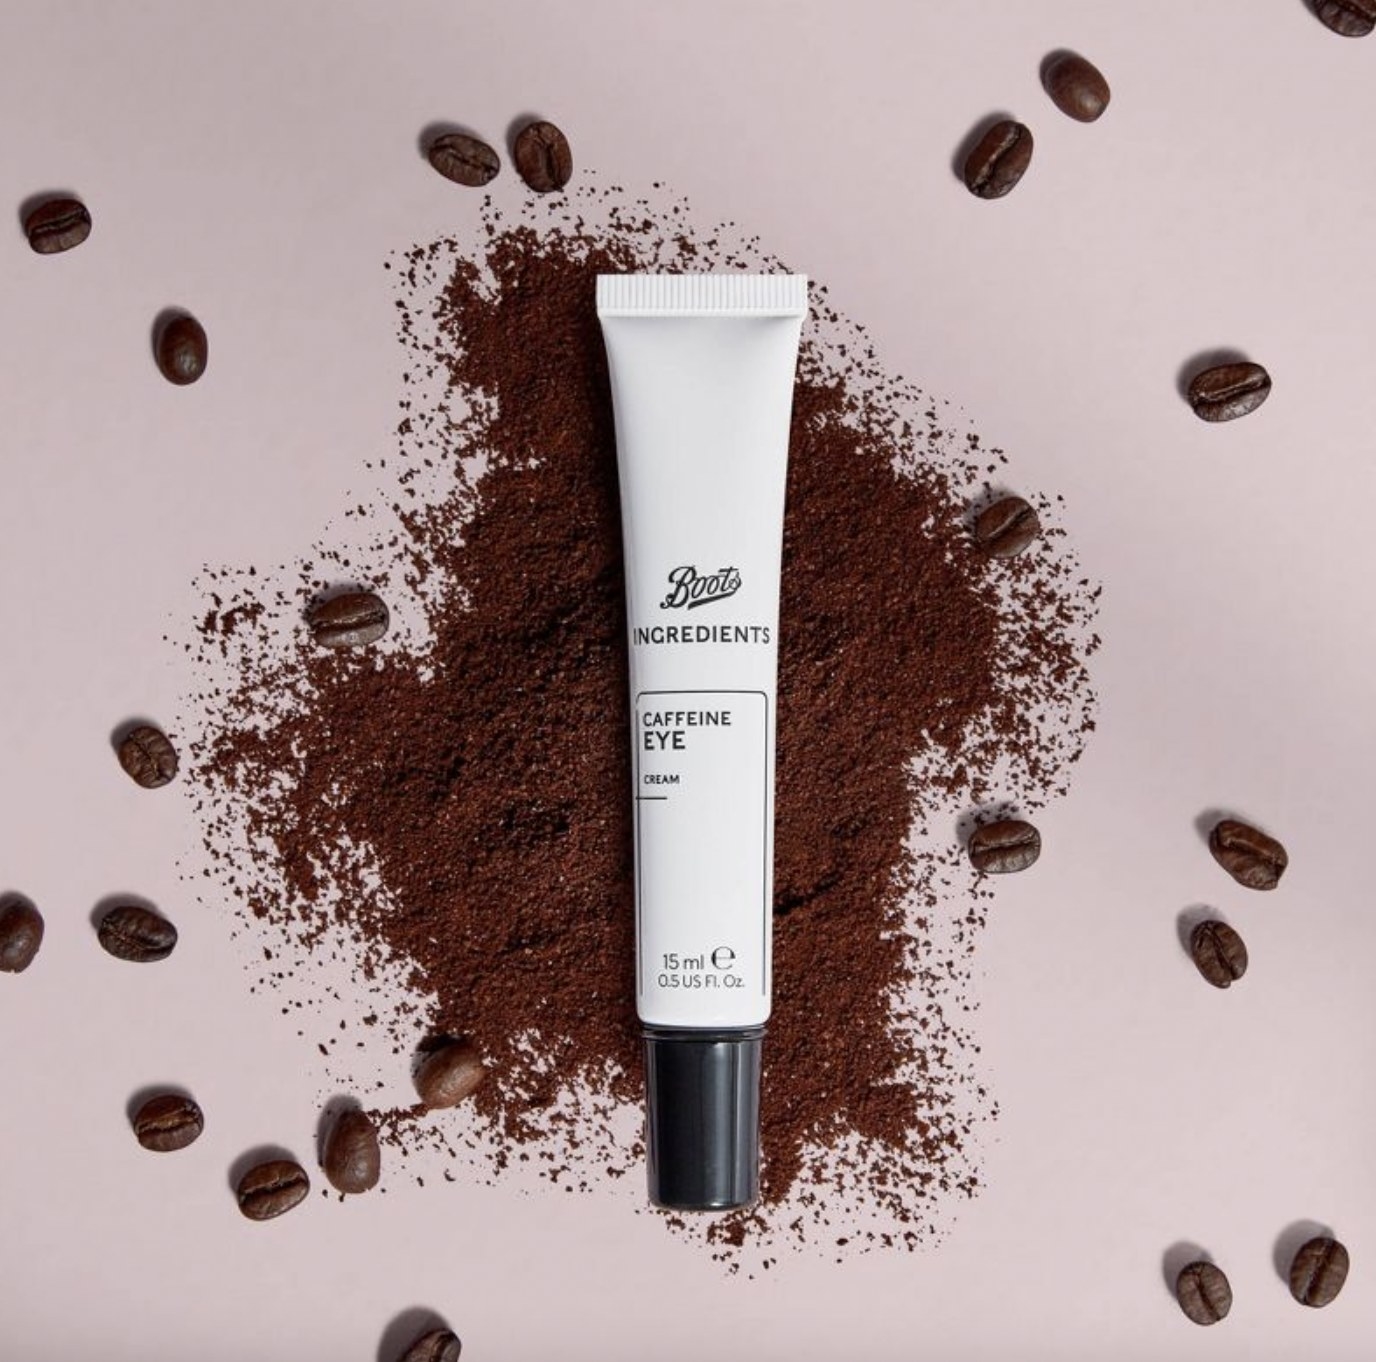 A tube of eye cream with scattered coffee beans and grounds